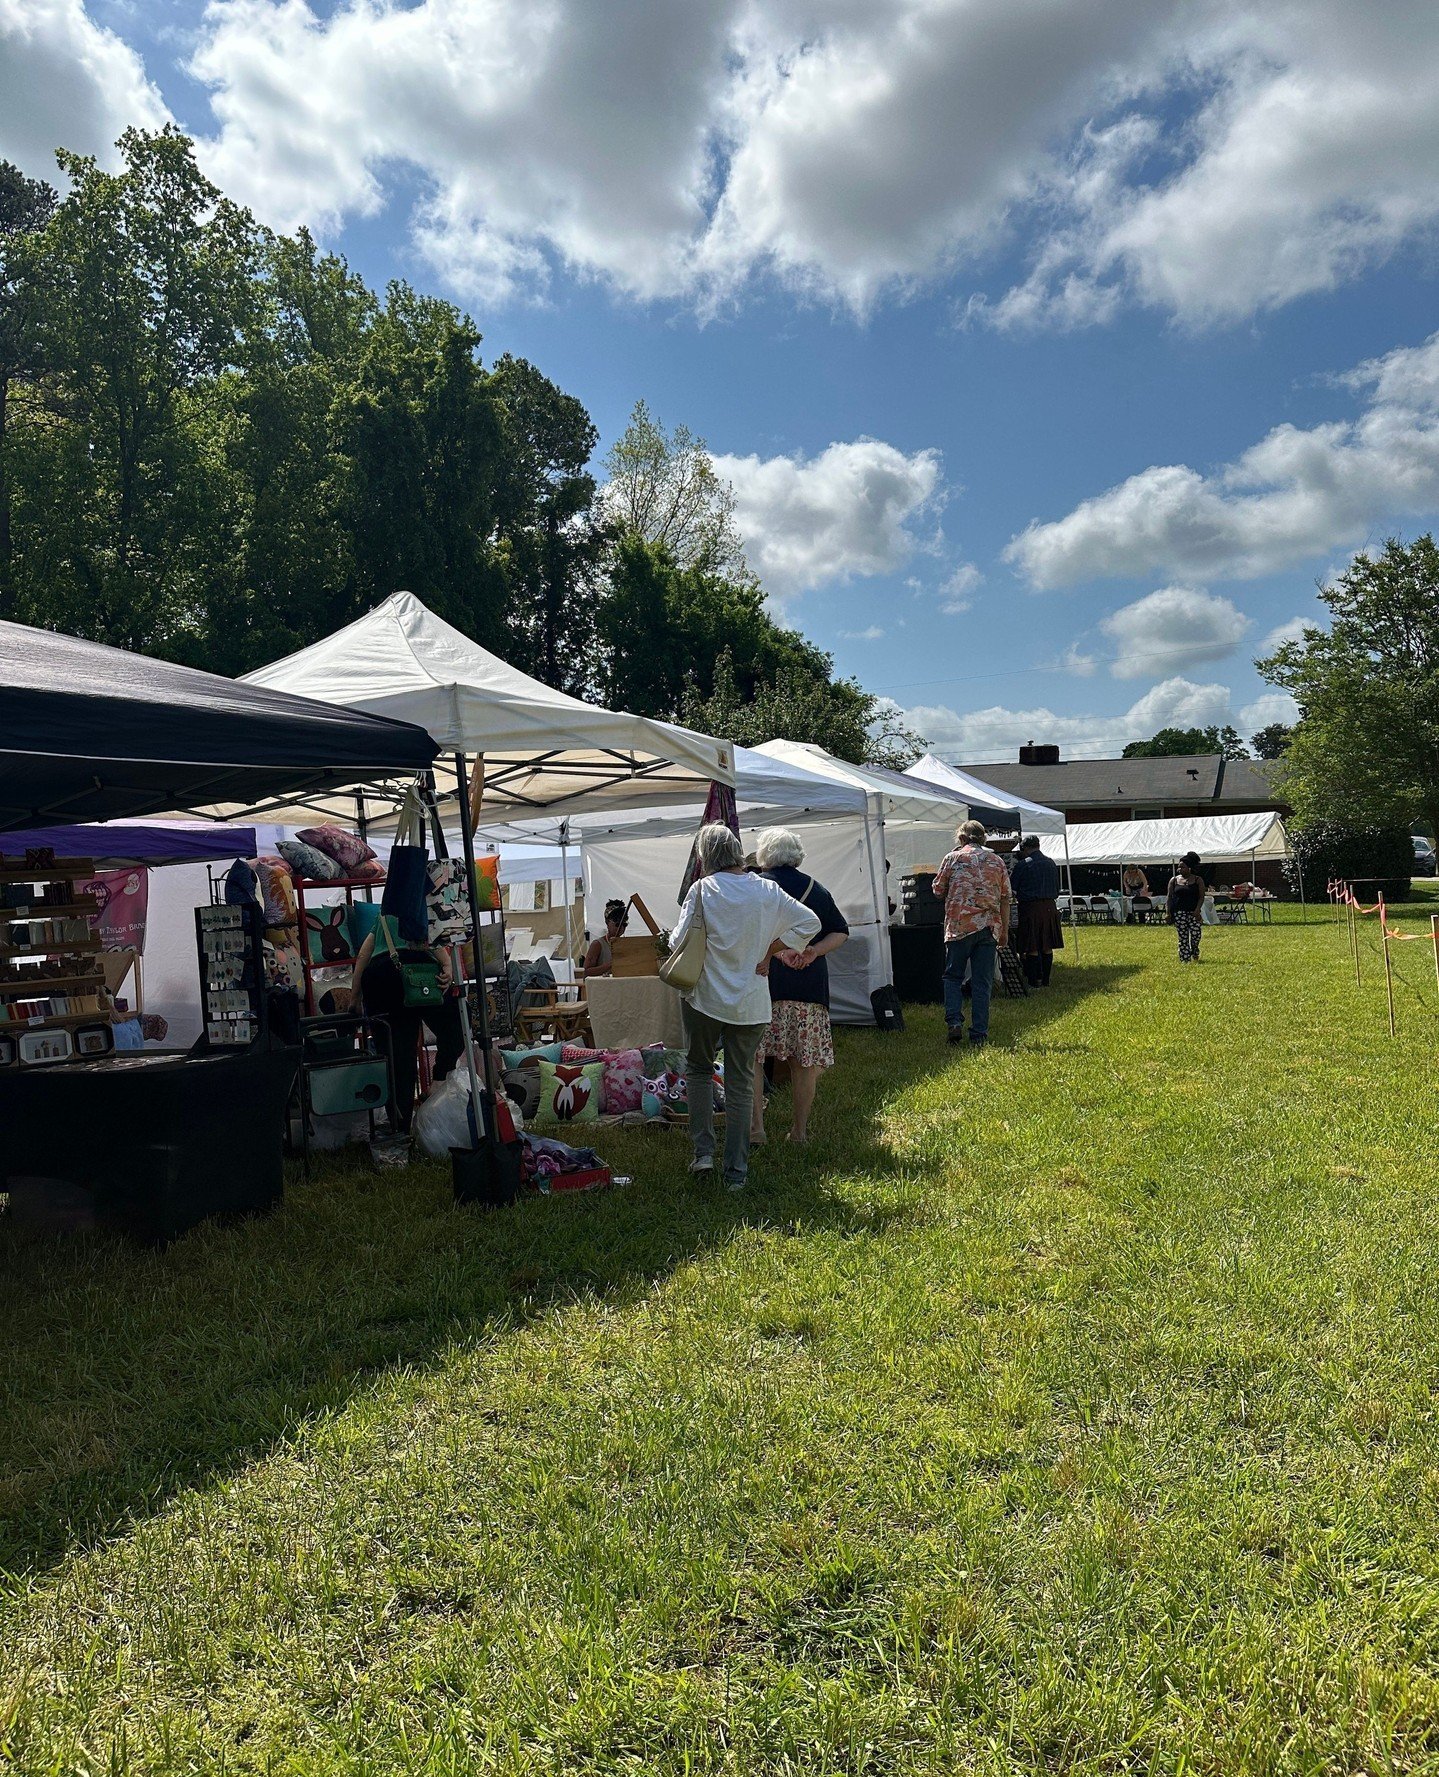 What a weekend!💯 Thanks to everyone who contributed to making our 7th Makers Market a rousing success! ❤️⁠
.⁠
.⁠
.⁠
#makersmarket #springtime #ncartists #ncmakers #ncmakersmarket #livemusic #gathering #chapelhill